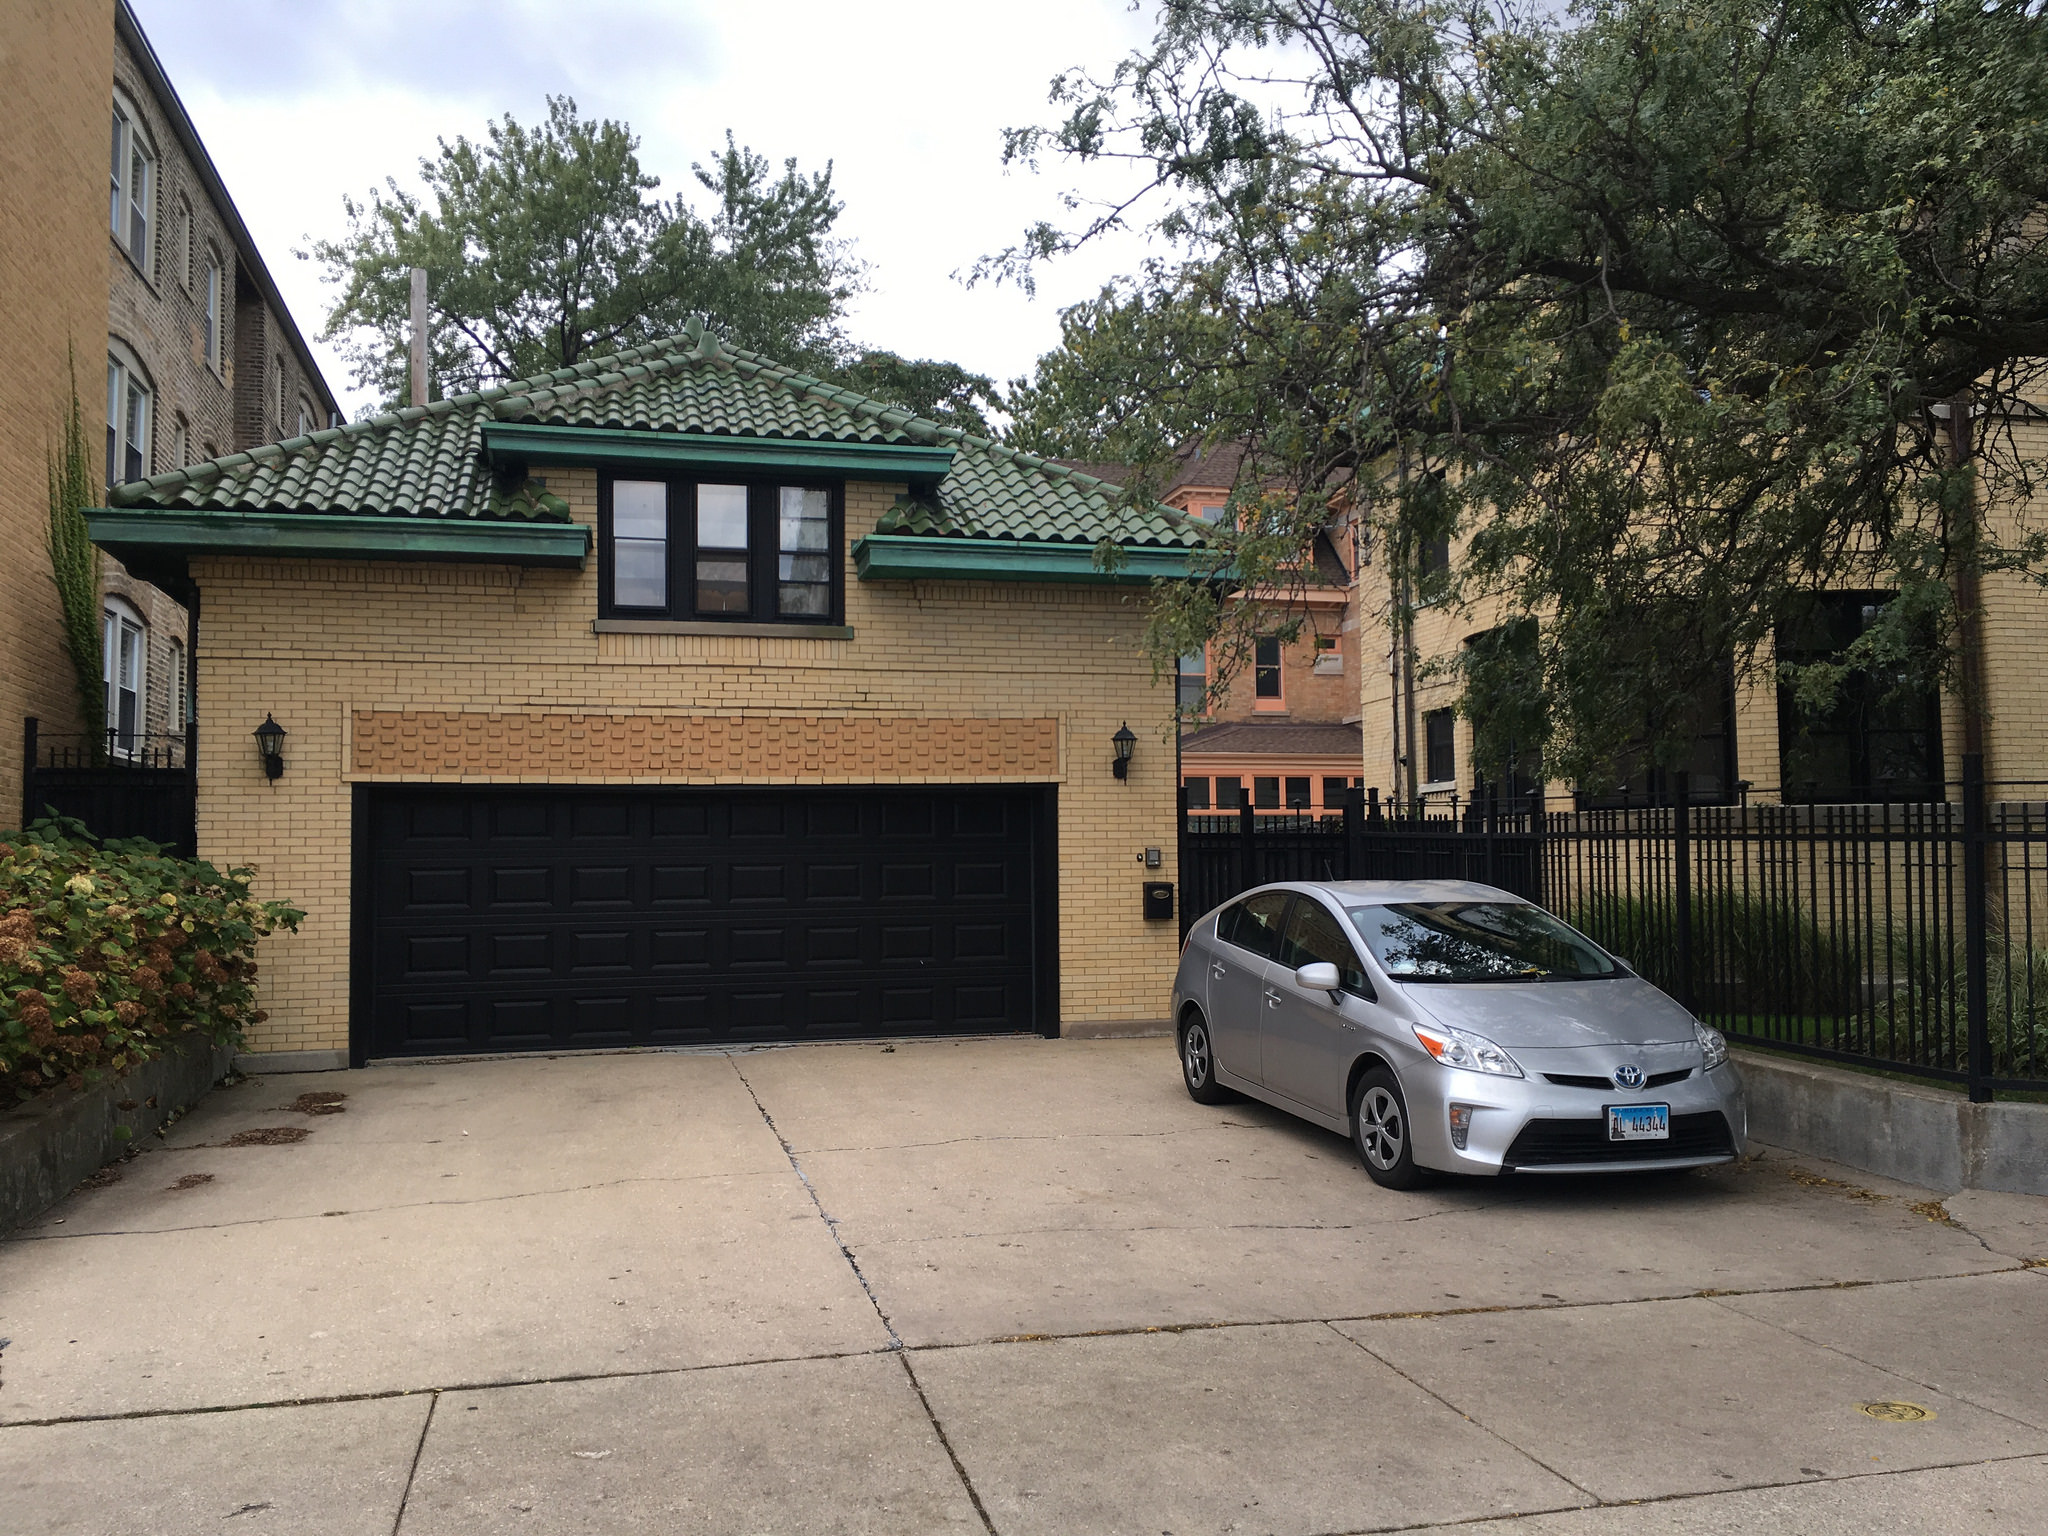 Free Potential with Garage Conversions Near Me